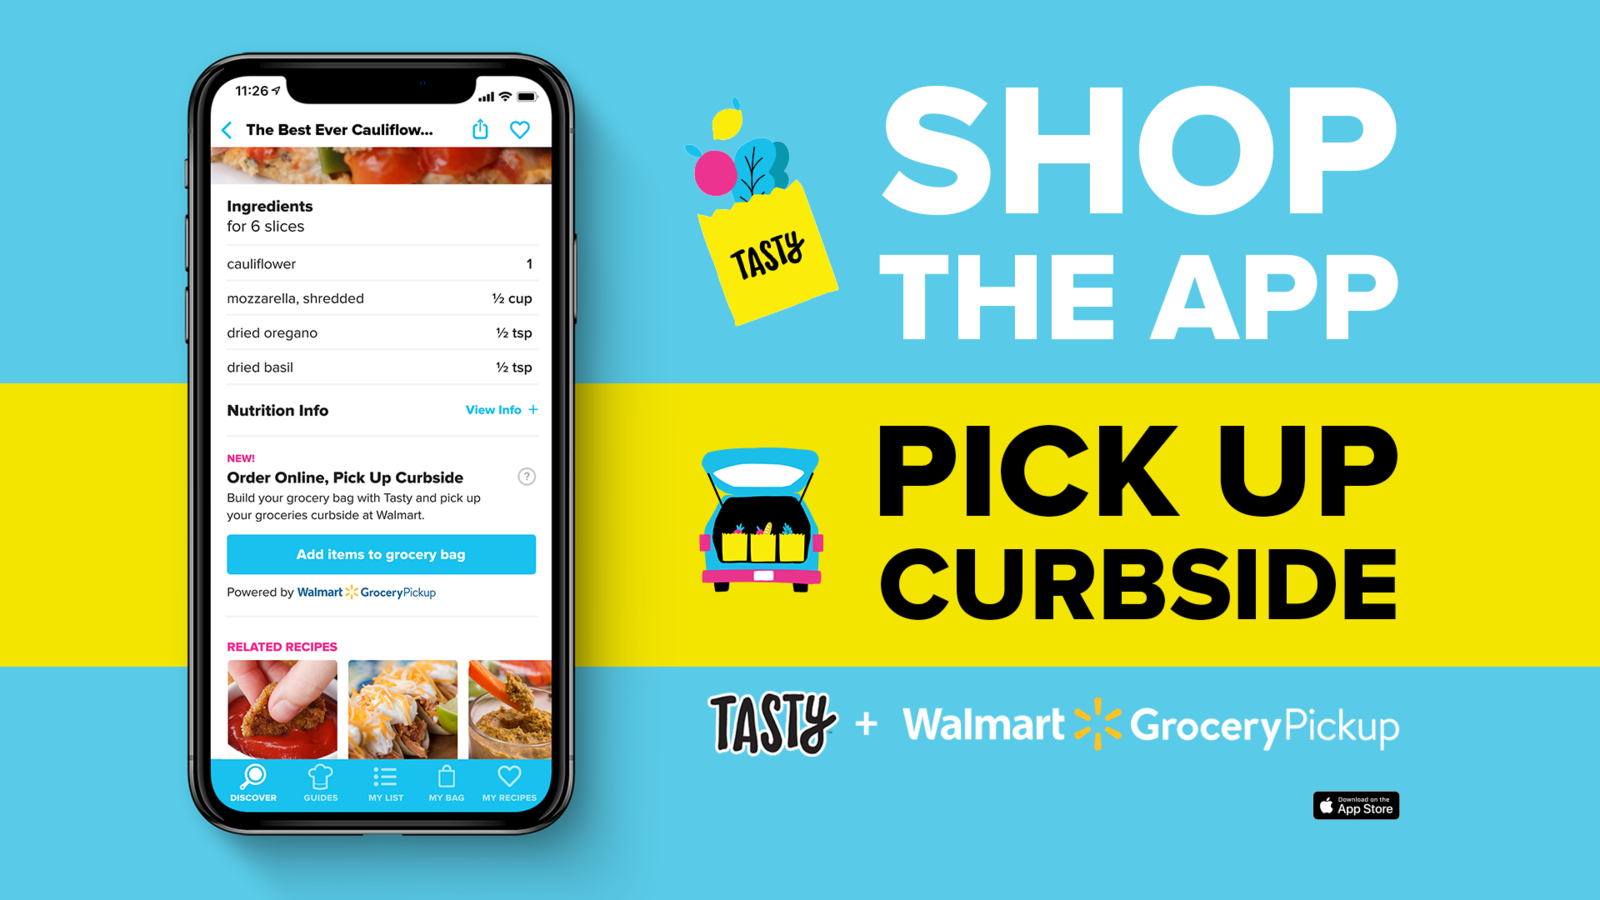 Advertisement for &#x27;Tasty&#x27; app with grocery pickup option, showcasing a cauliflower recipe on a phone screen